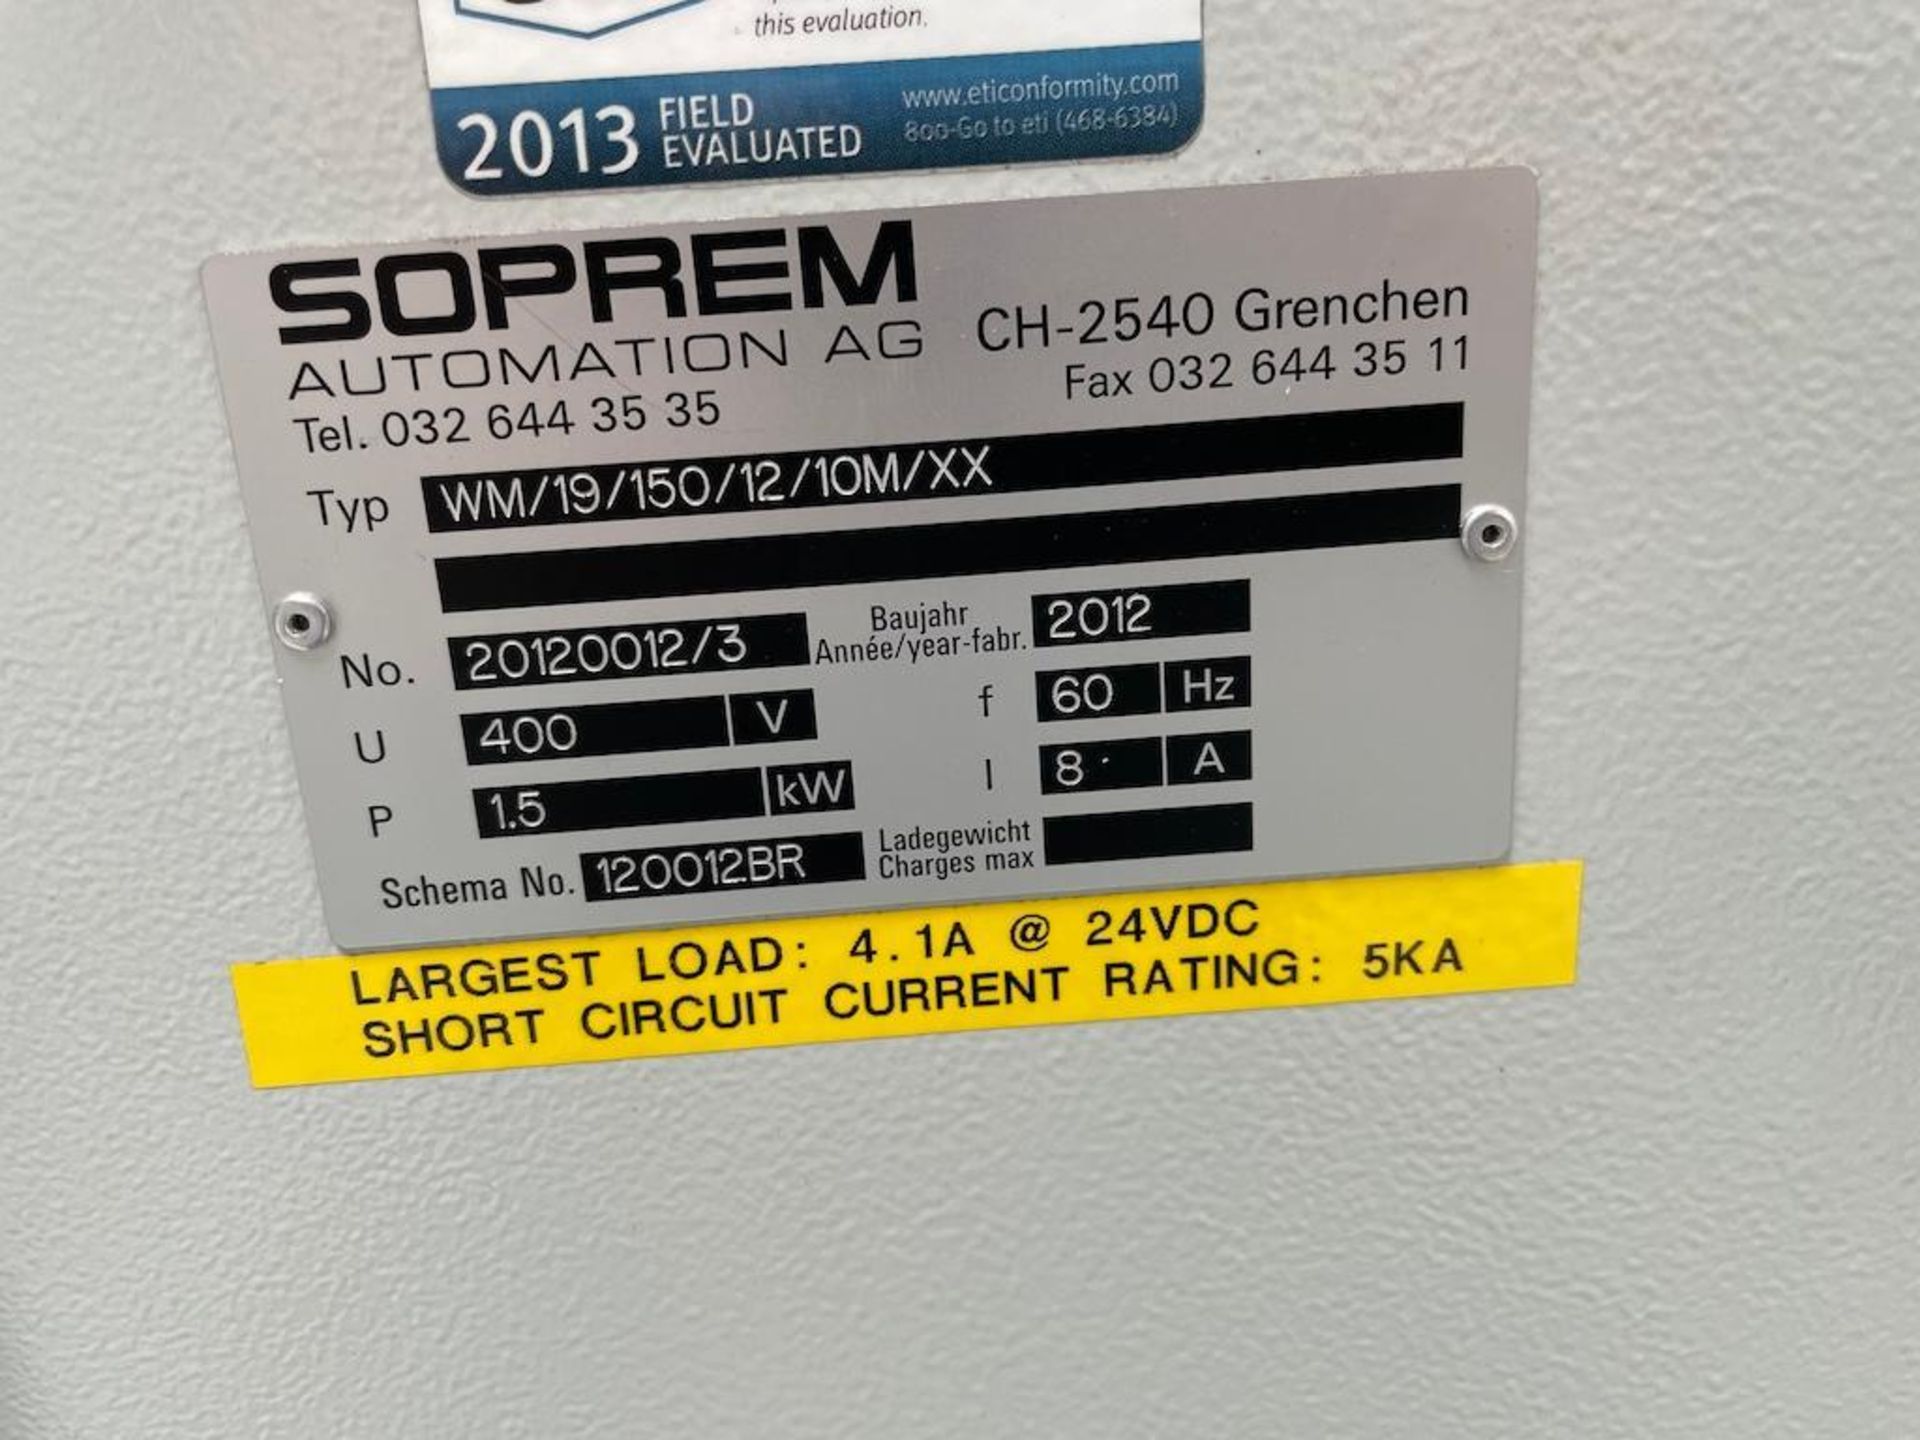 2012 SOPREM AUTOMATION AG MODEL CH-2540 GRENCHEN TYPE WM/19/150/12/1M/XX, SN 20120012/3 [81] [MATANE - Image 4 of 4